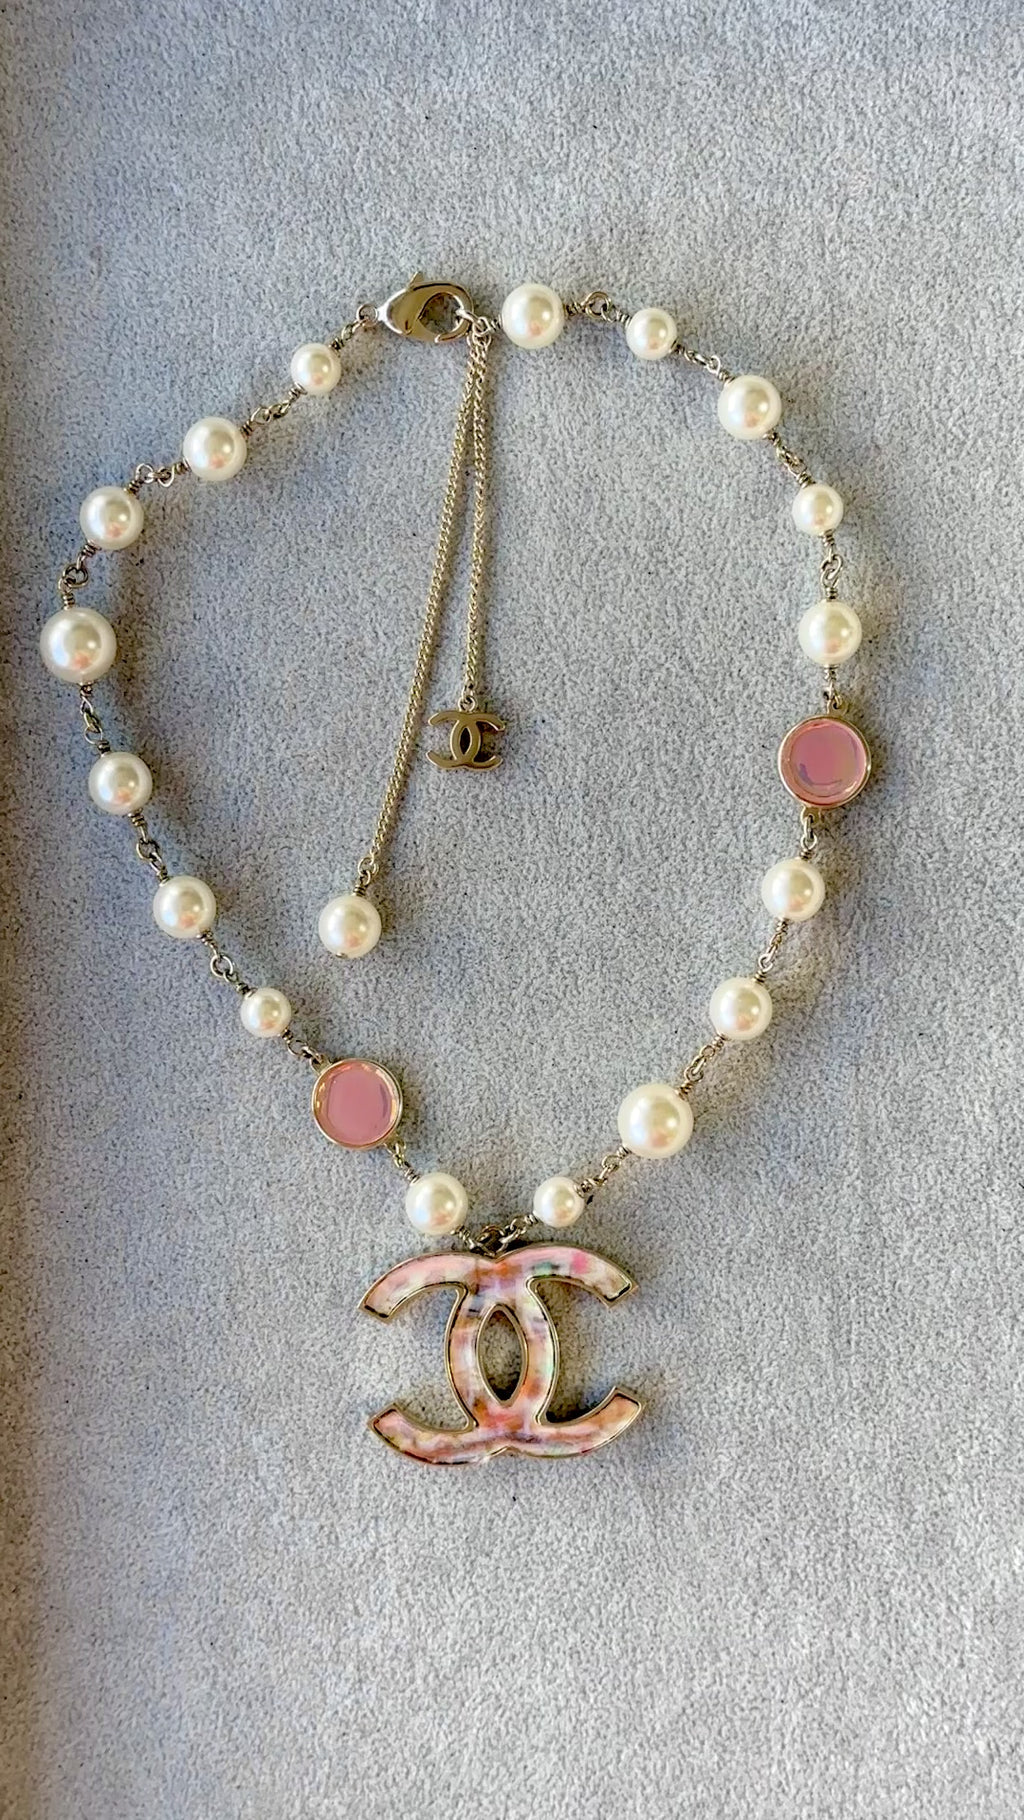 Chanel Collier with Pearls and Gripoix Signed 97A - 1997 Autumn